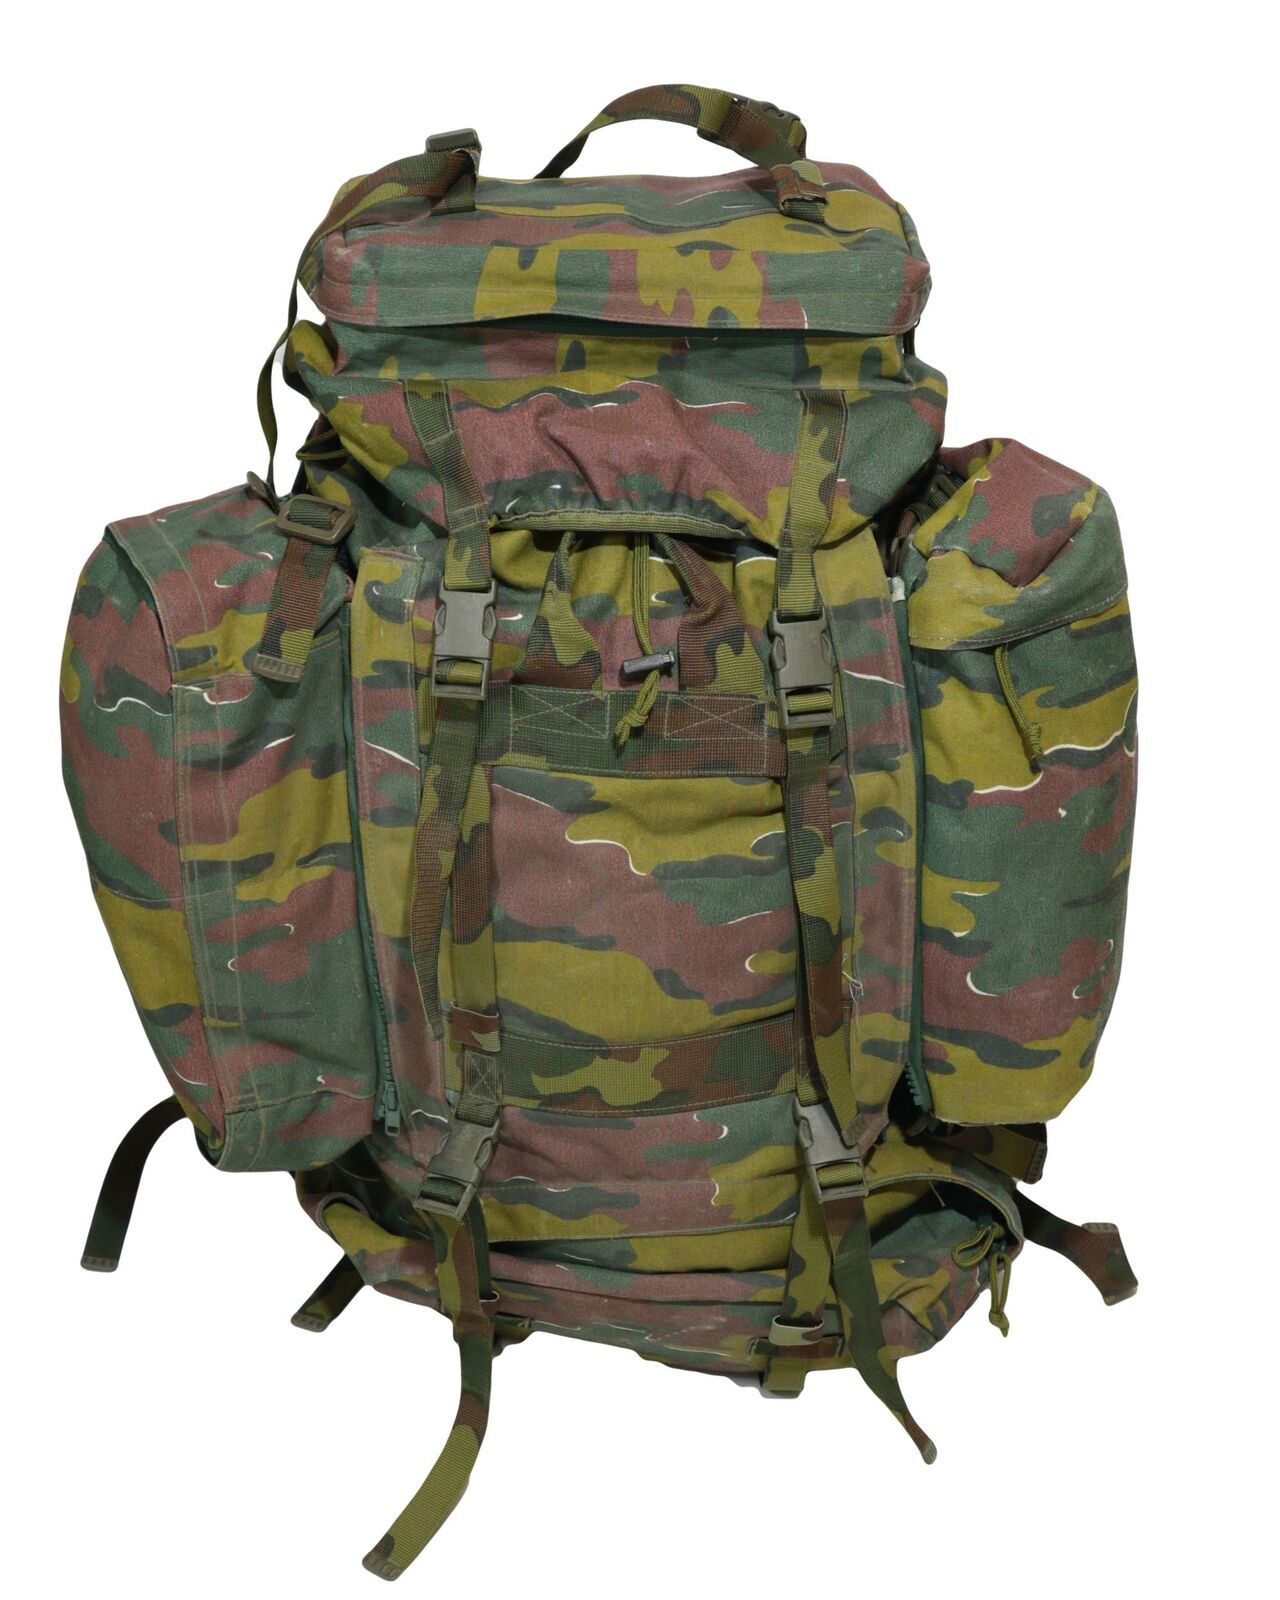 Genuine Belgian Army Surplus 110L Bergen Backpack With Detachable day sack